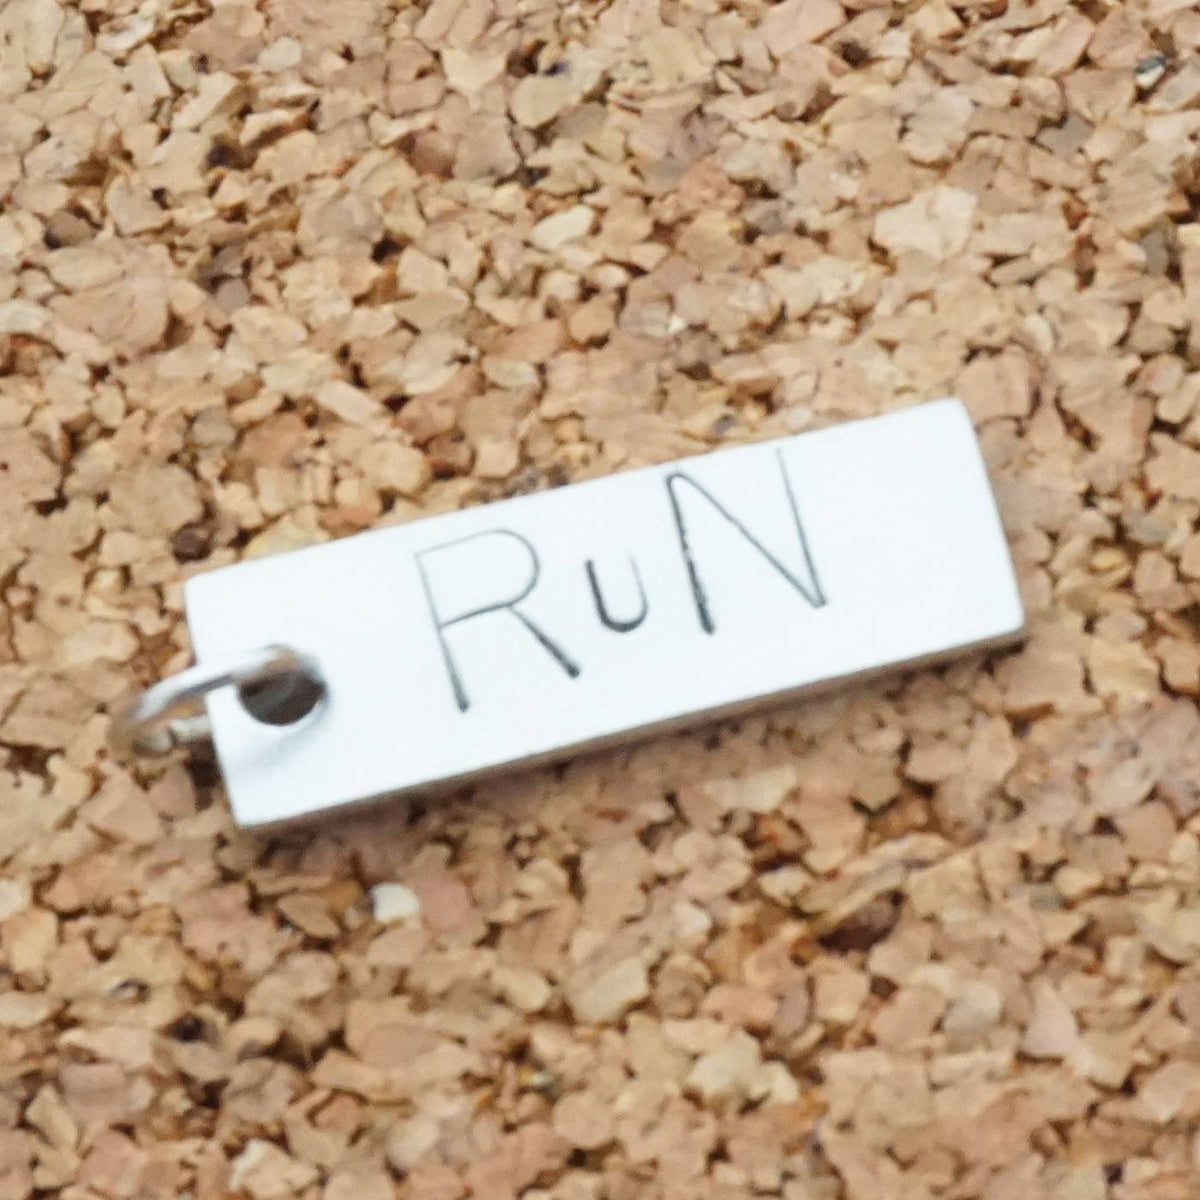 Run - Stamped Tag Pendant